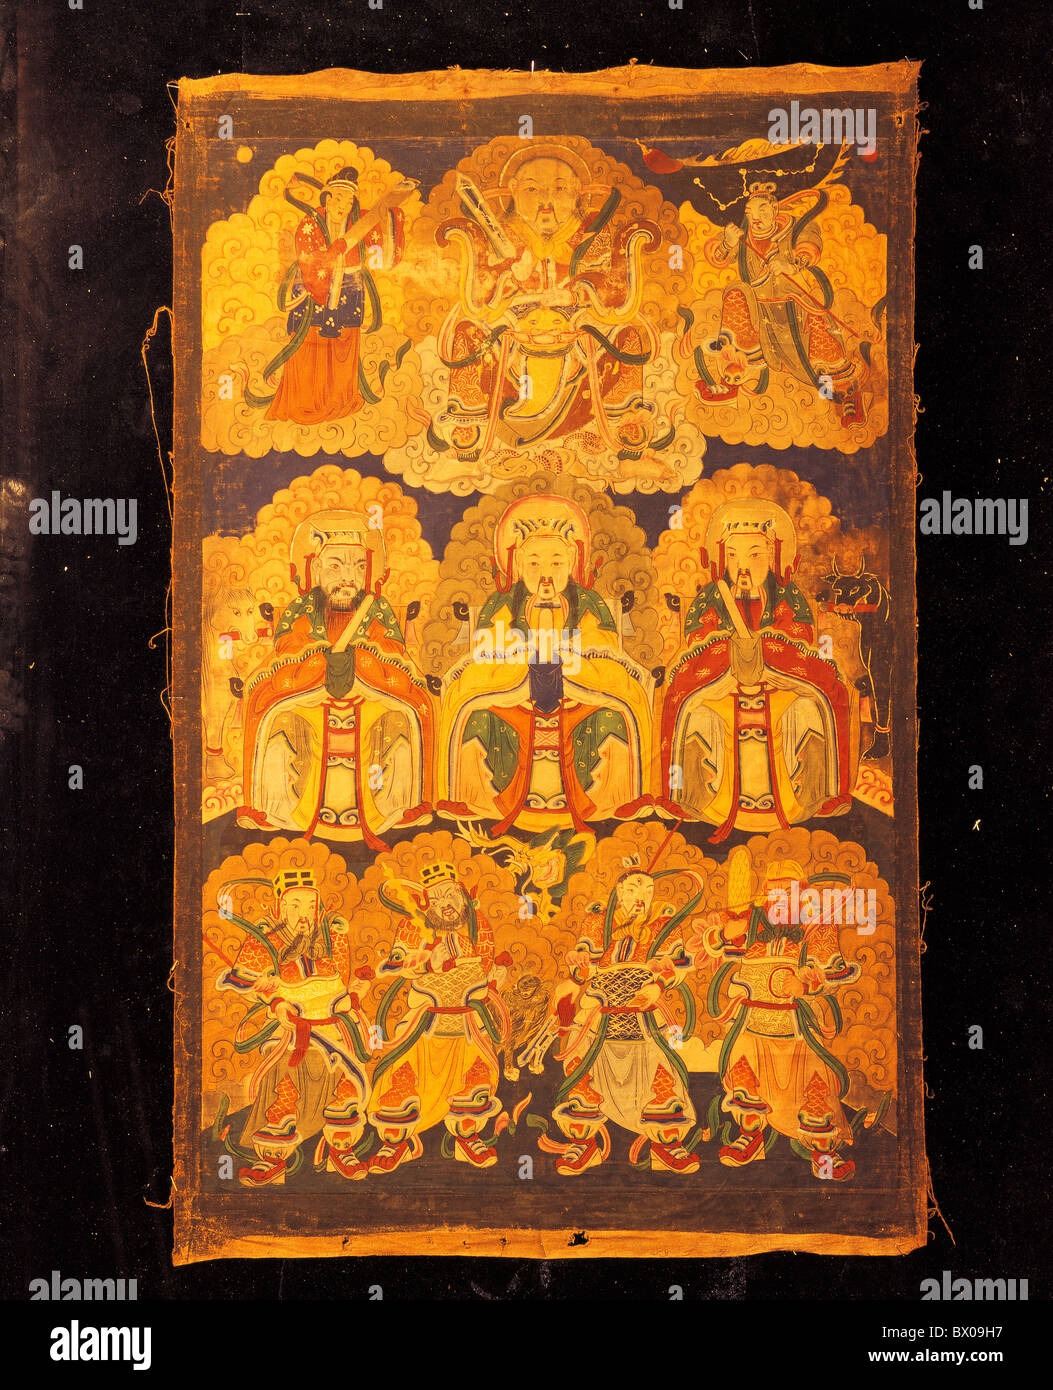 Exquisite Tangka depicting Taoist and Buddhist deities from Ming Dynasty, Tibet, China Stock Photo